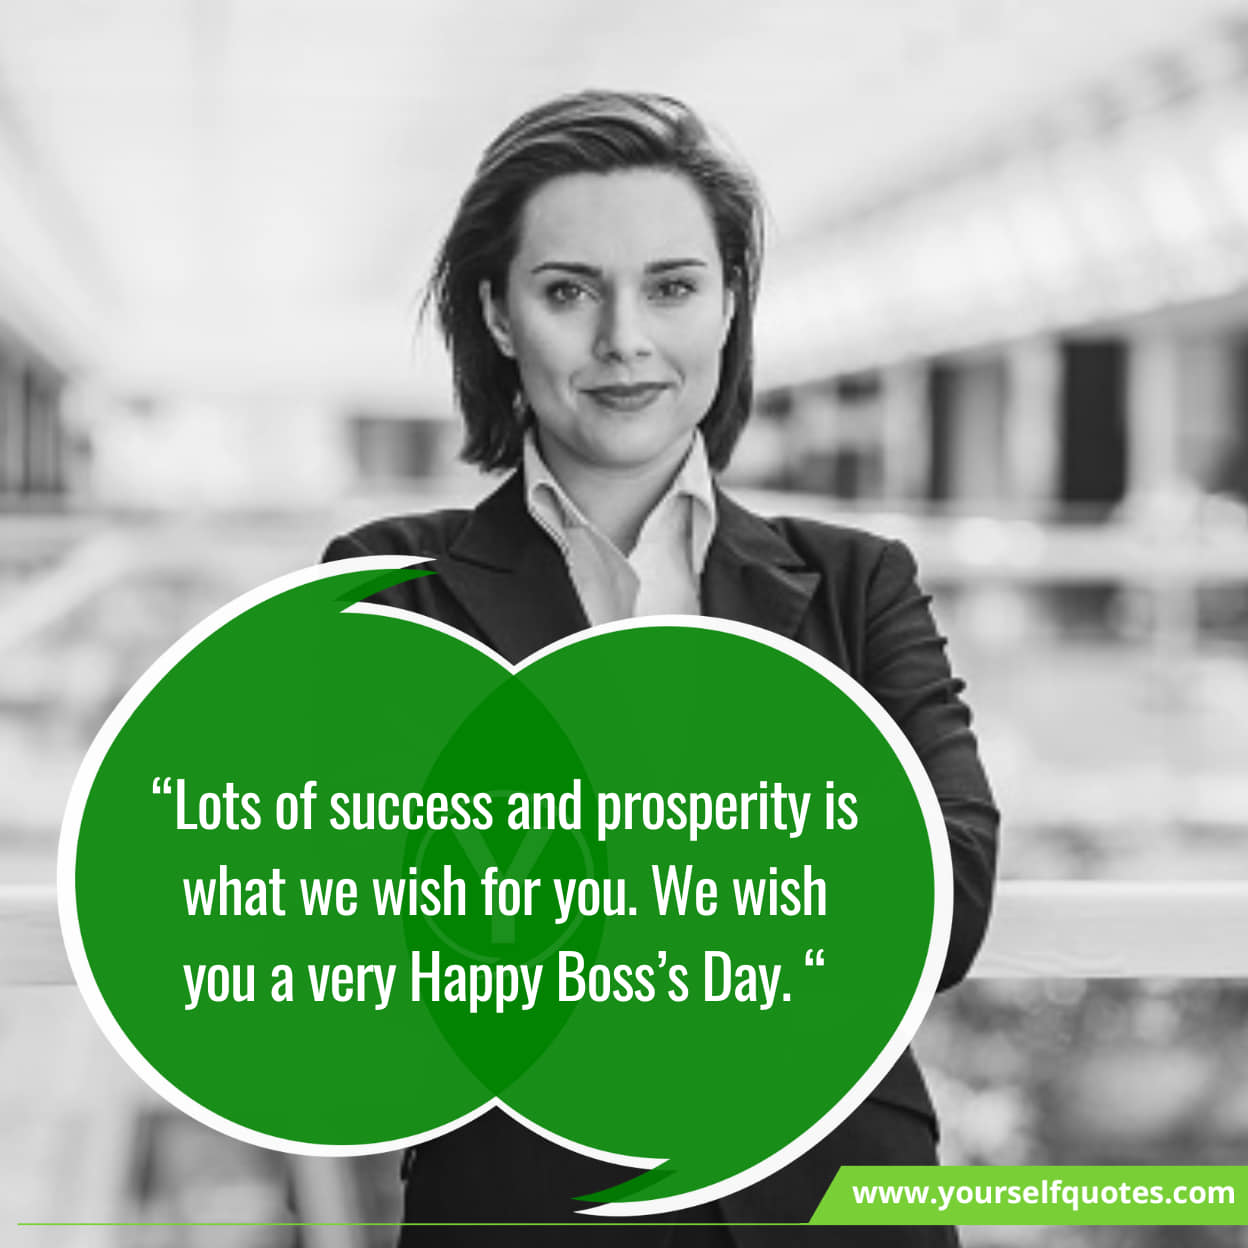 Top 10 Inspiring Quotes Messages About Boss Day